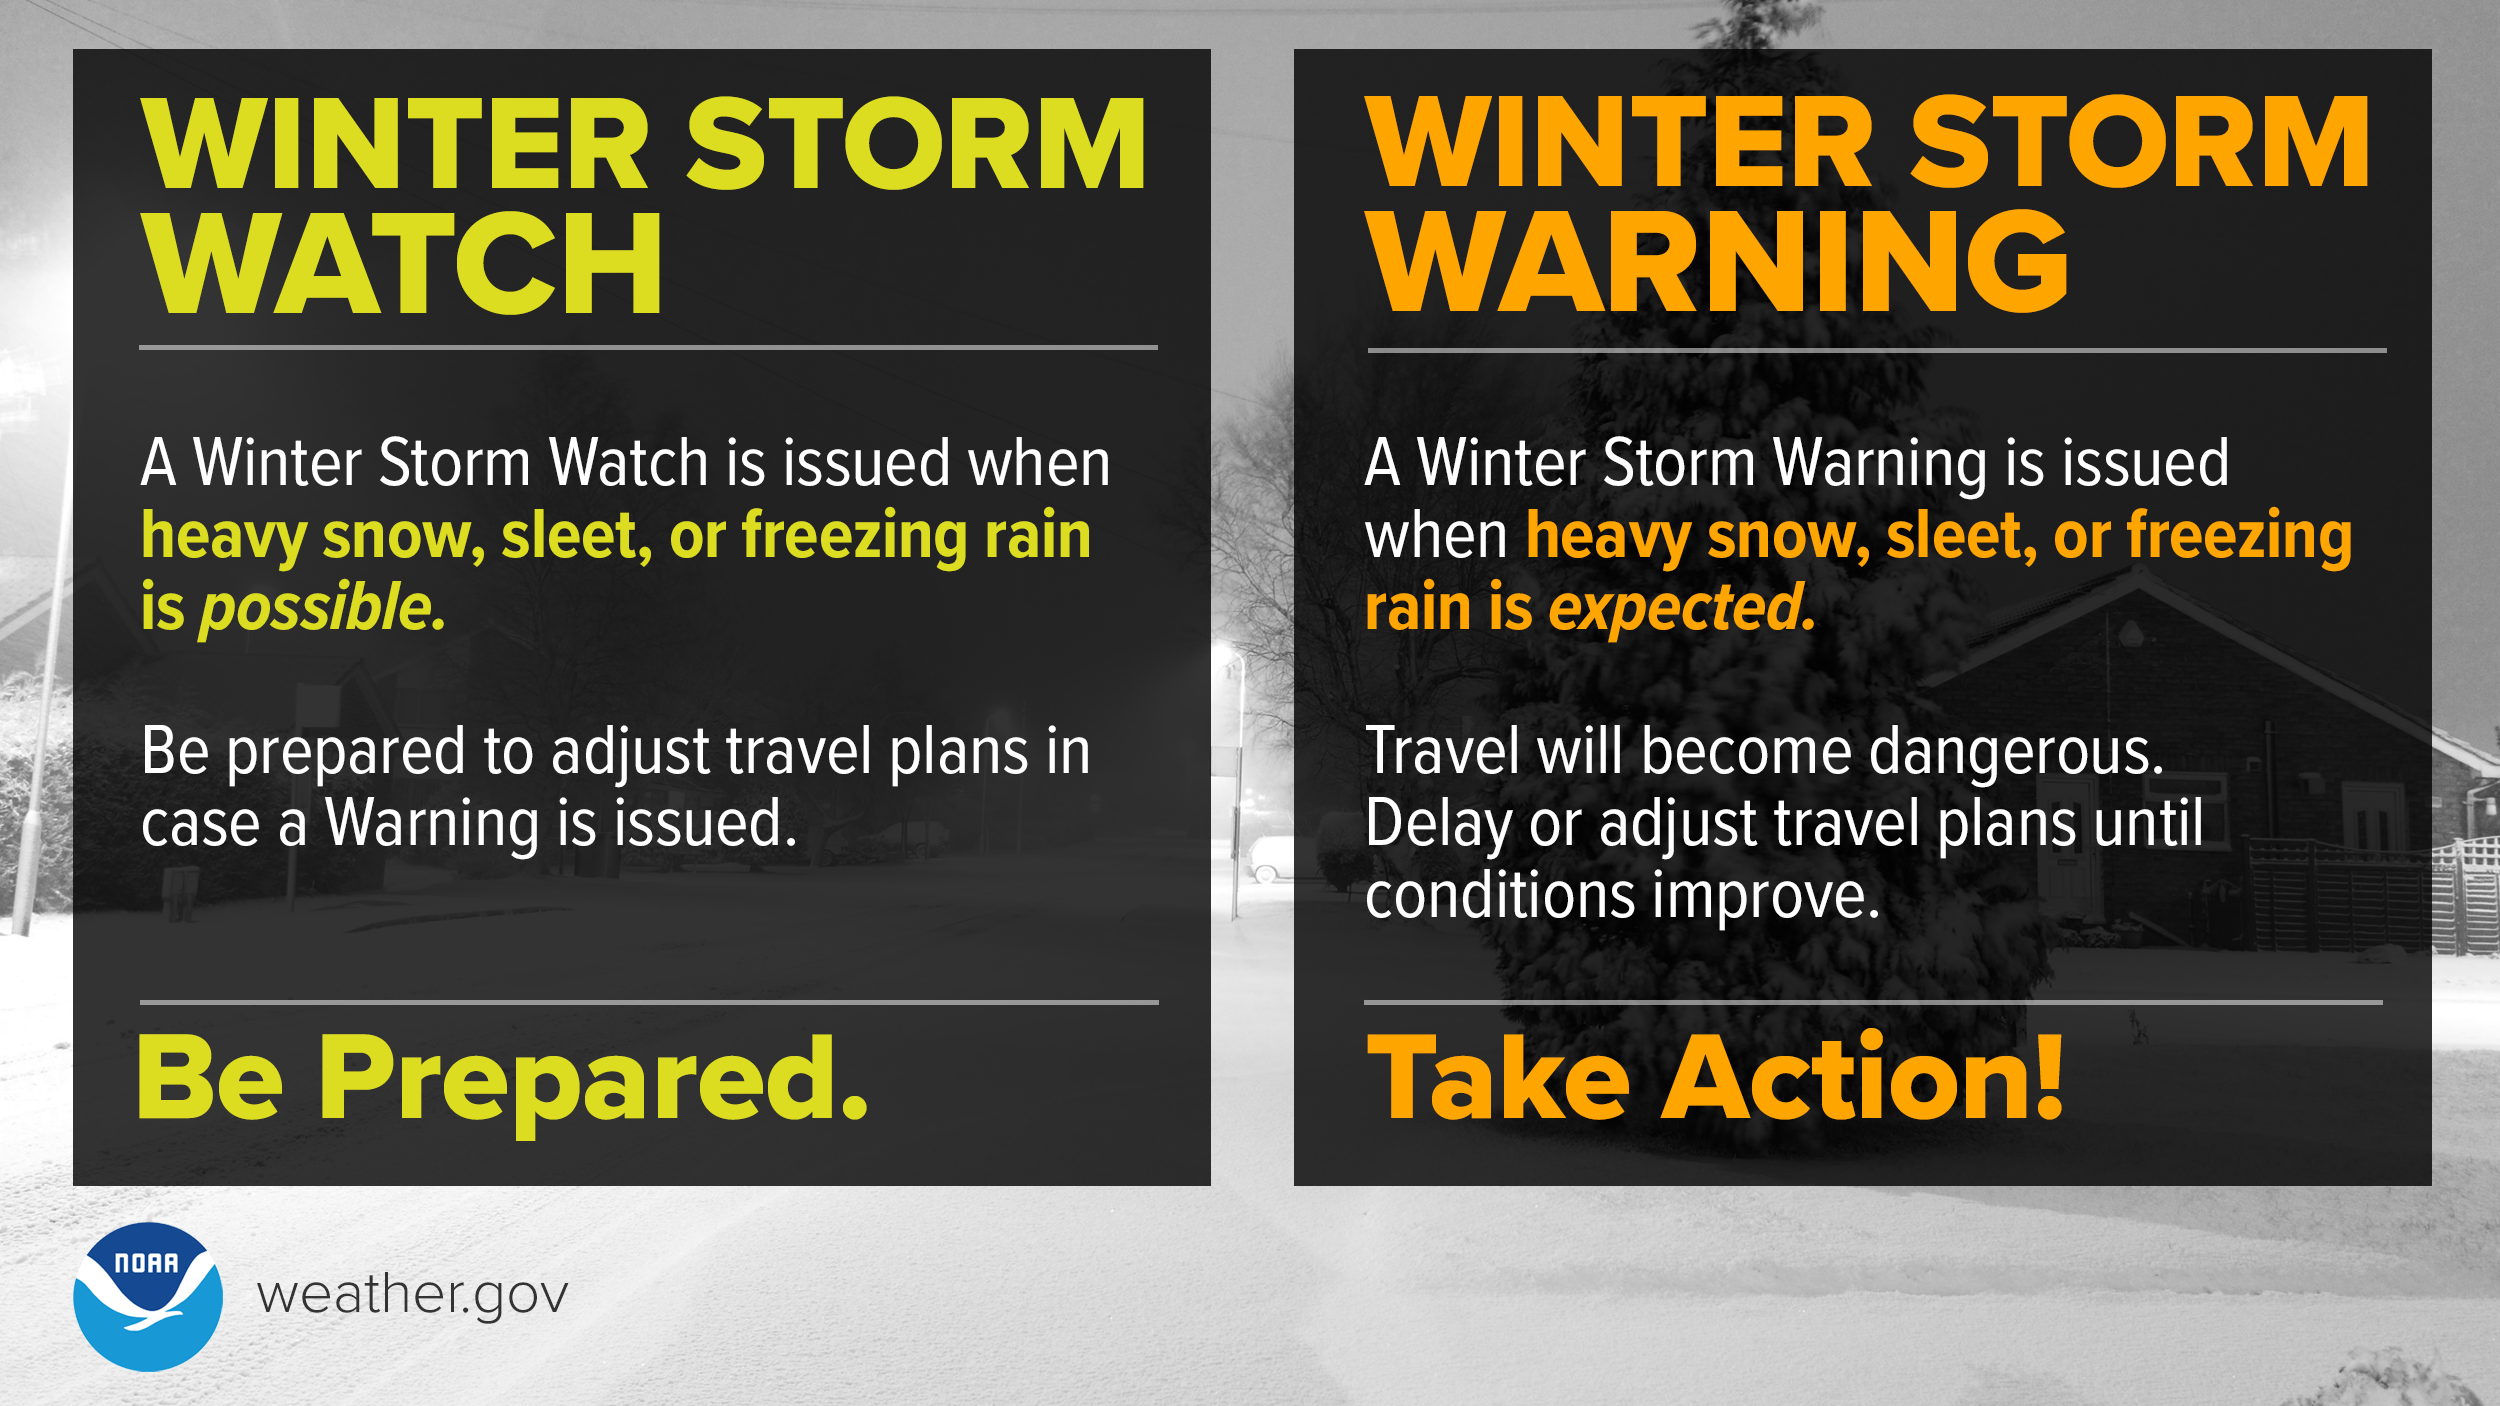 Nonsubscriber? How to watch WNY's winter storm coverage